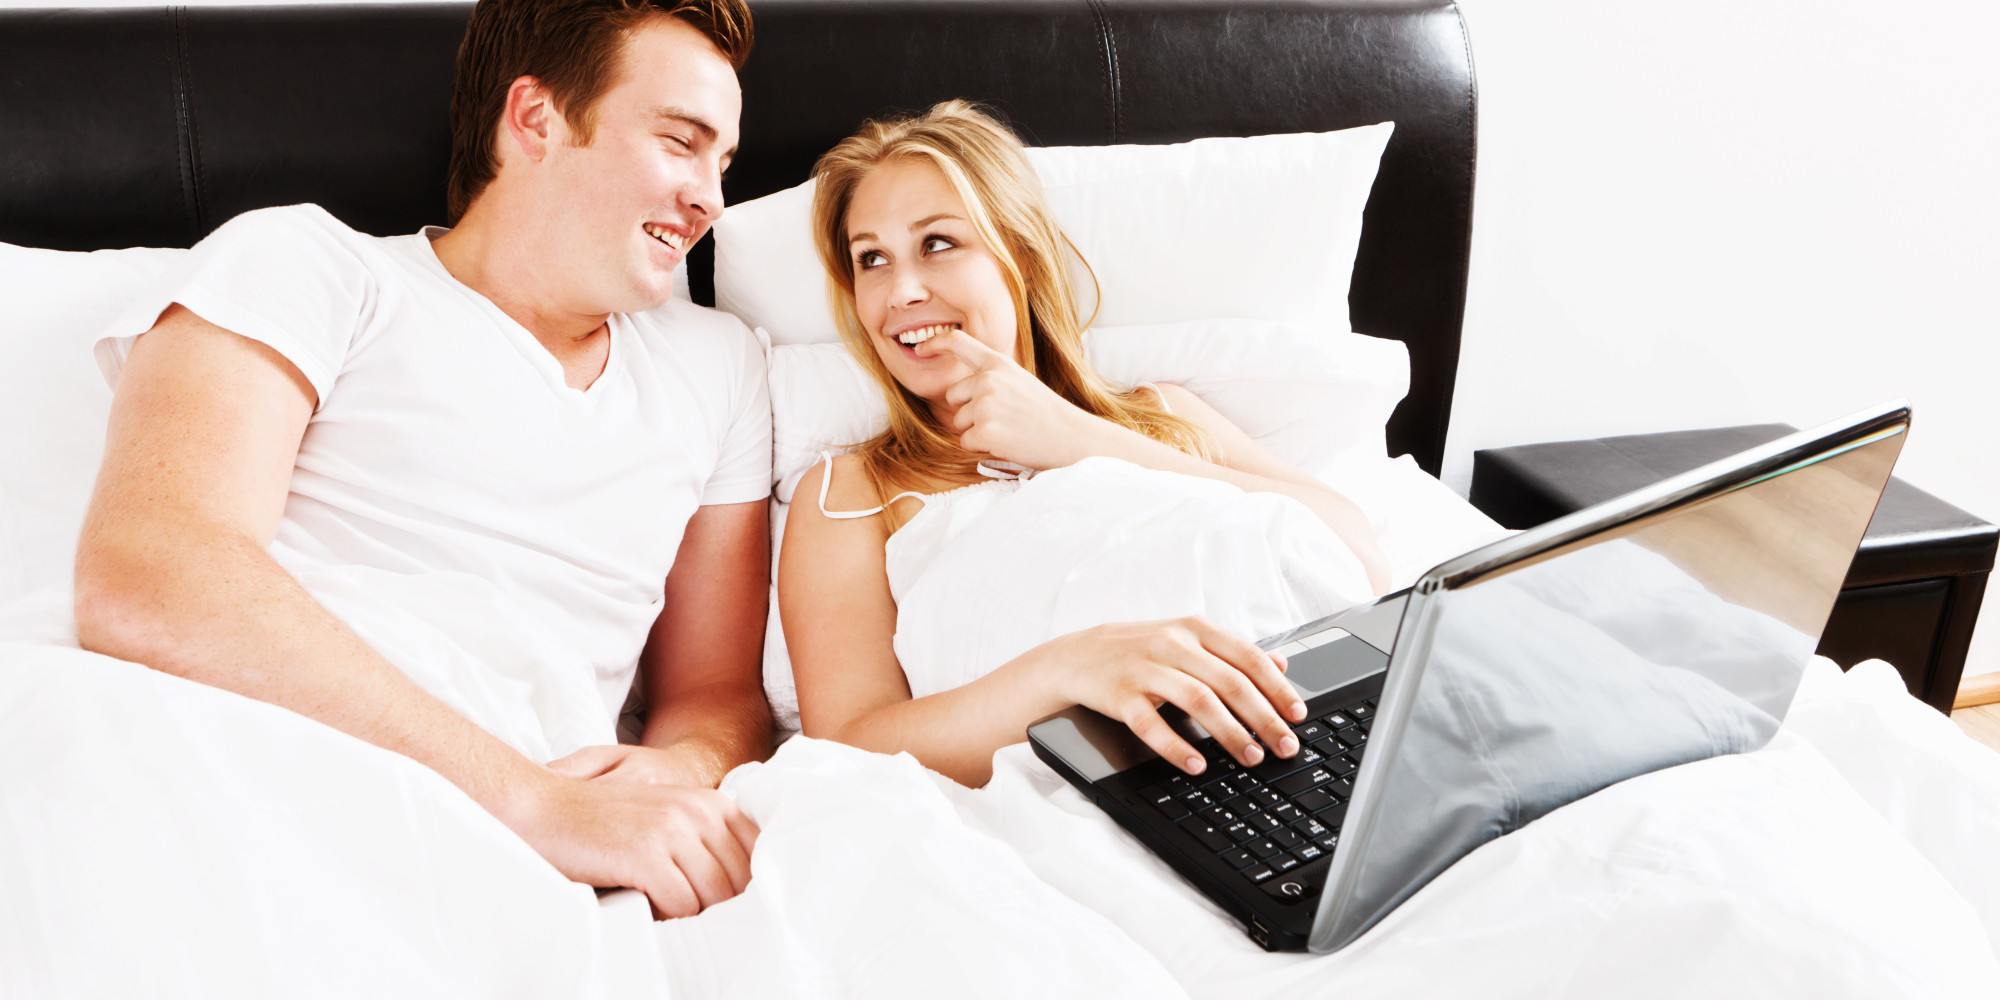 Couple watching porn together